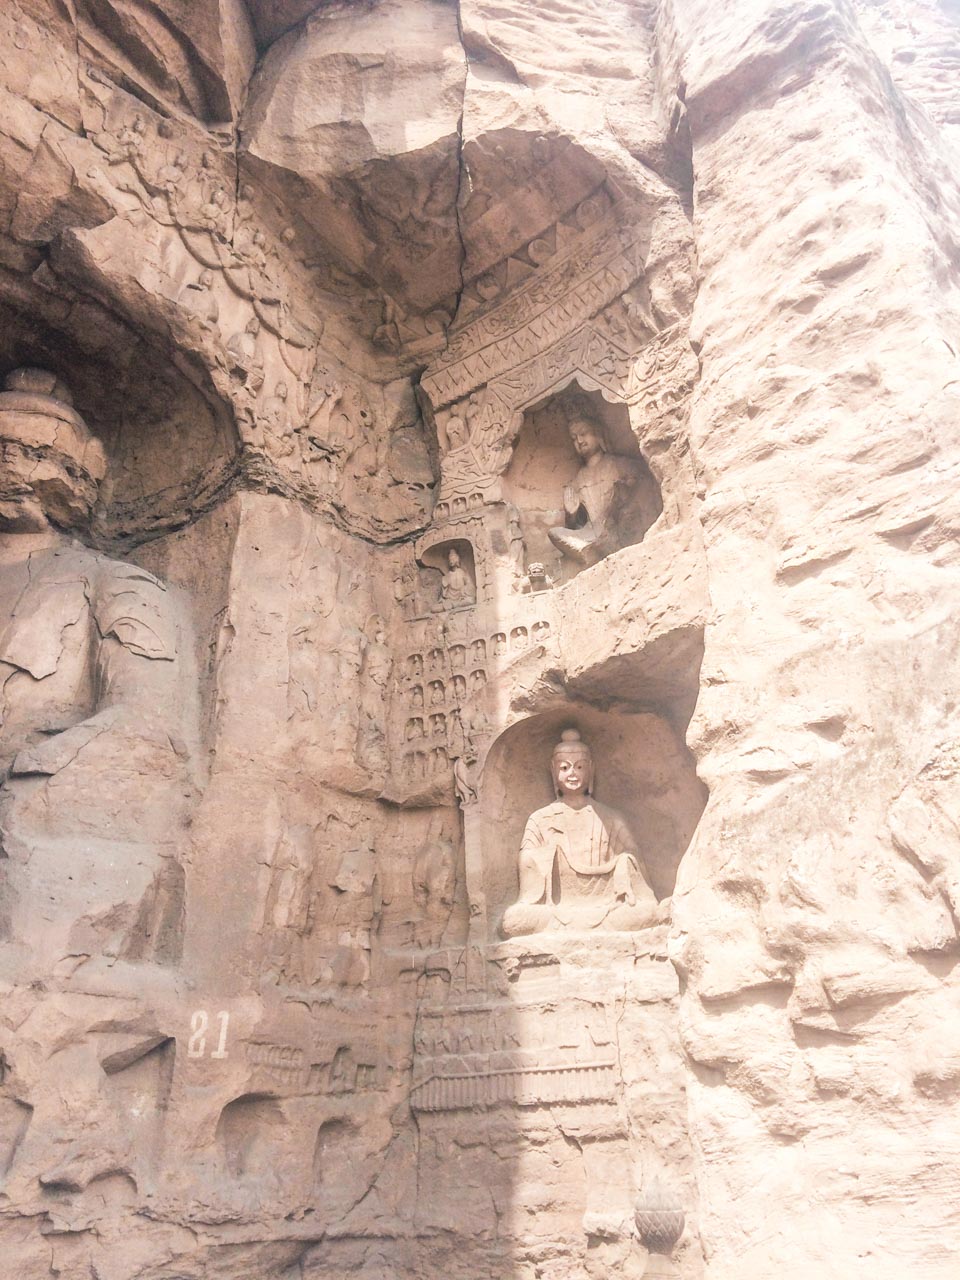 Statues carved into the cliffside at the Yungang Grottoes in Datong, Shanxi